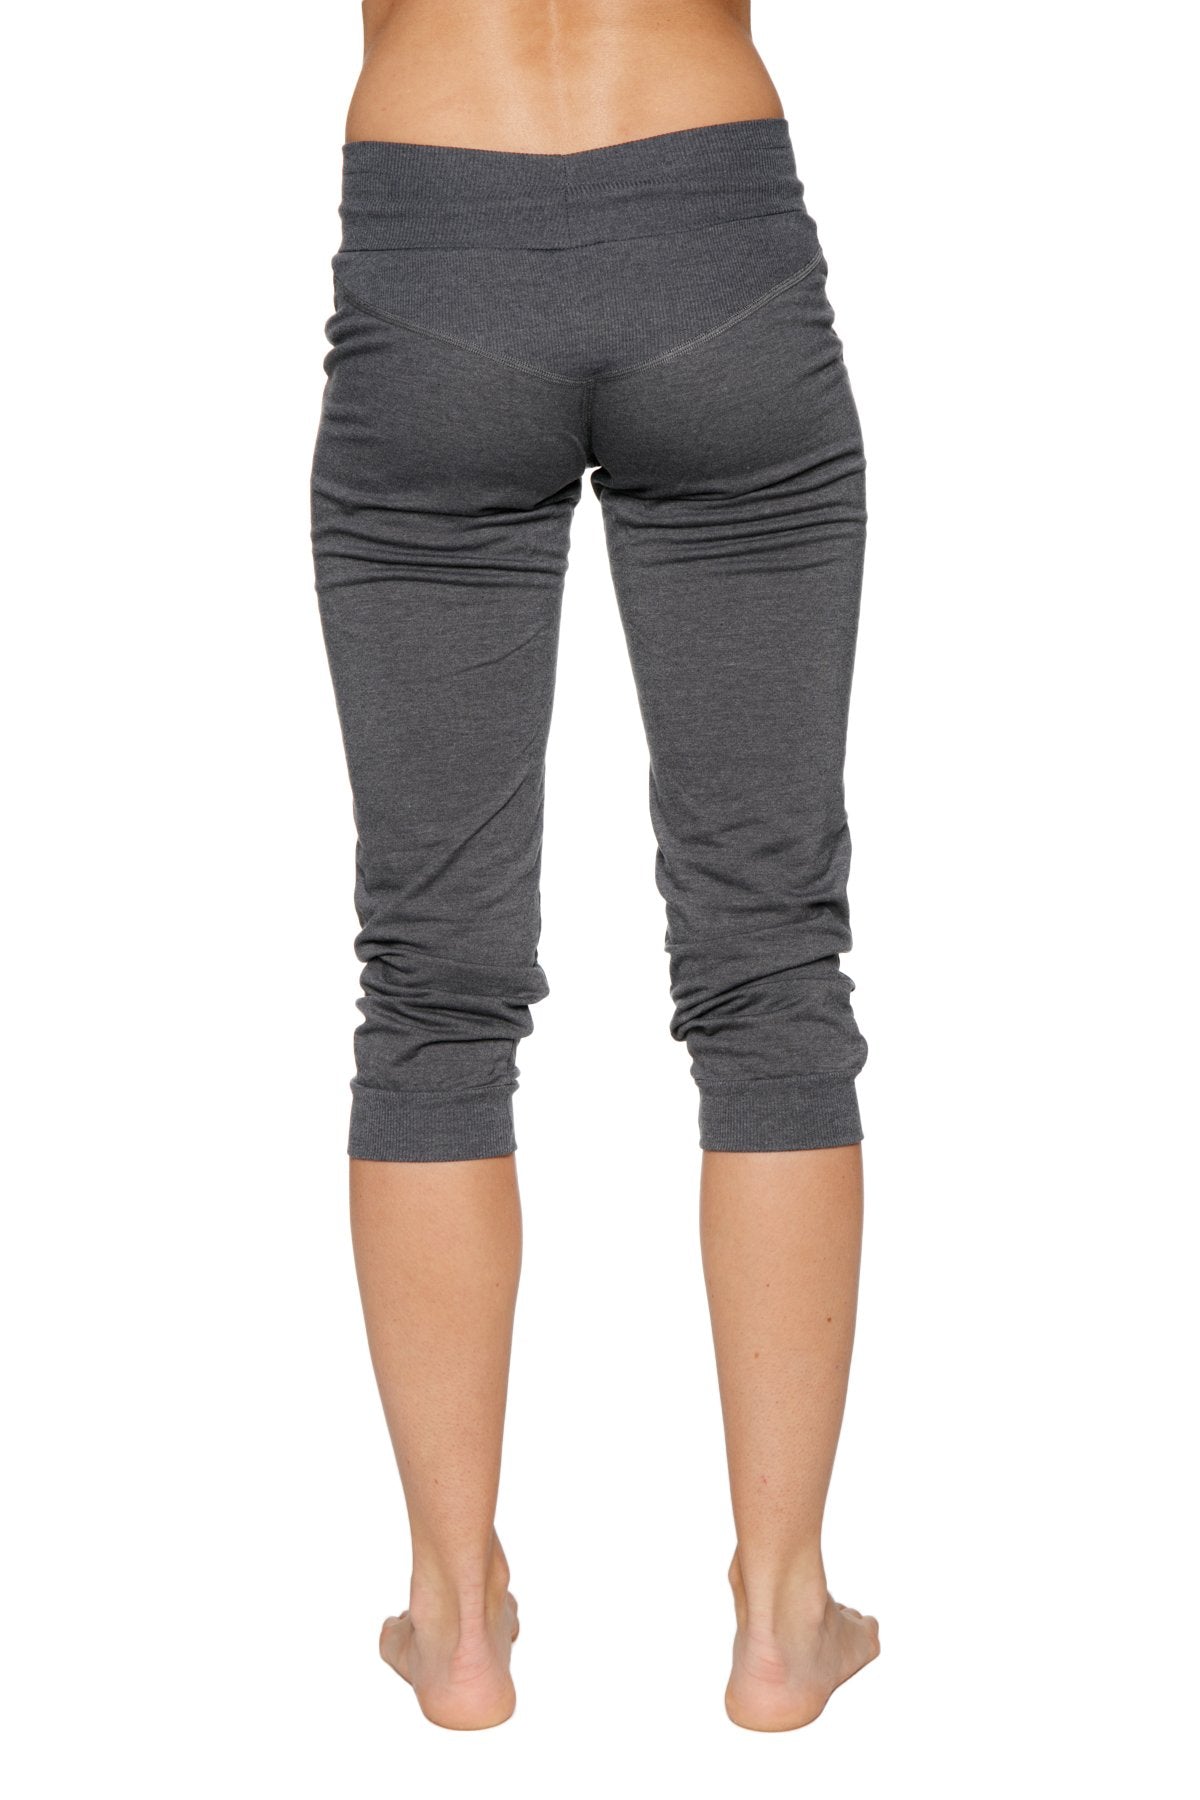 Women's Cuffed Jogger Yoga Pant (Solid Charcoal) by 4-rth